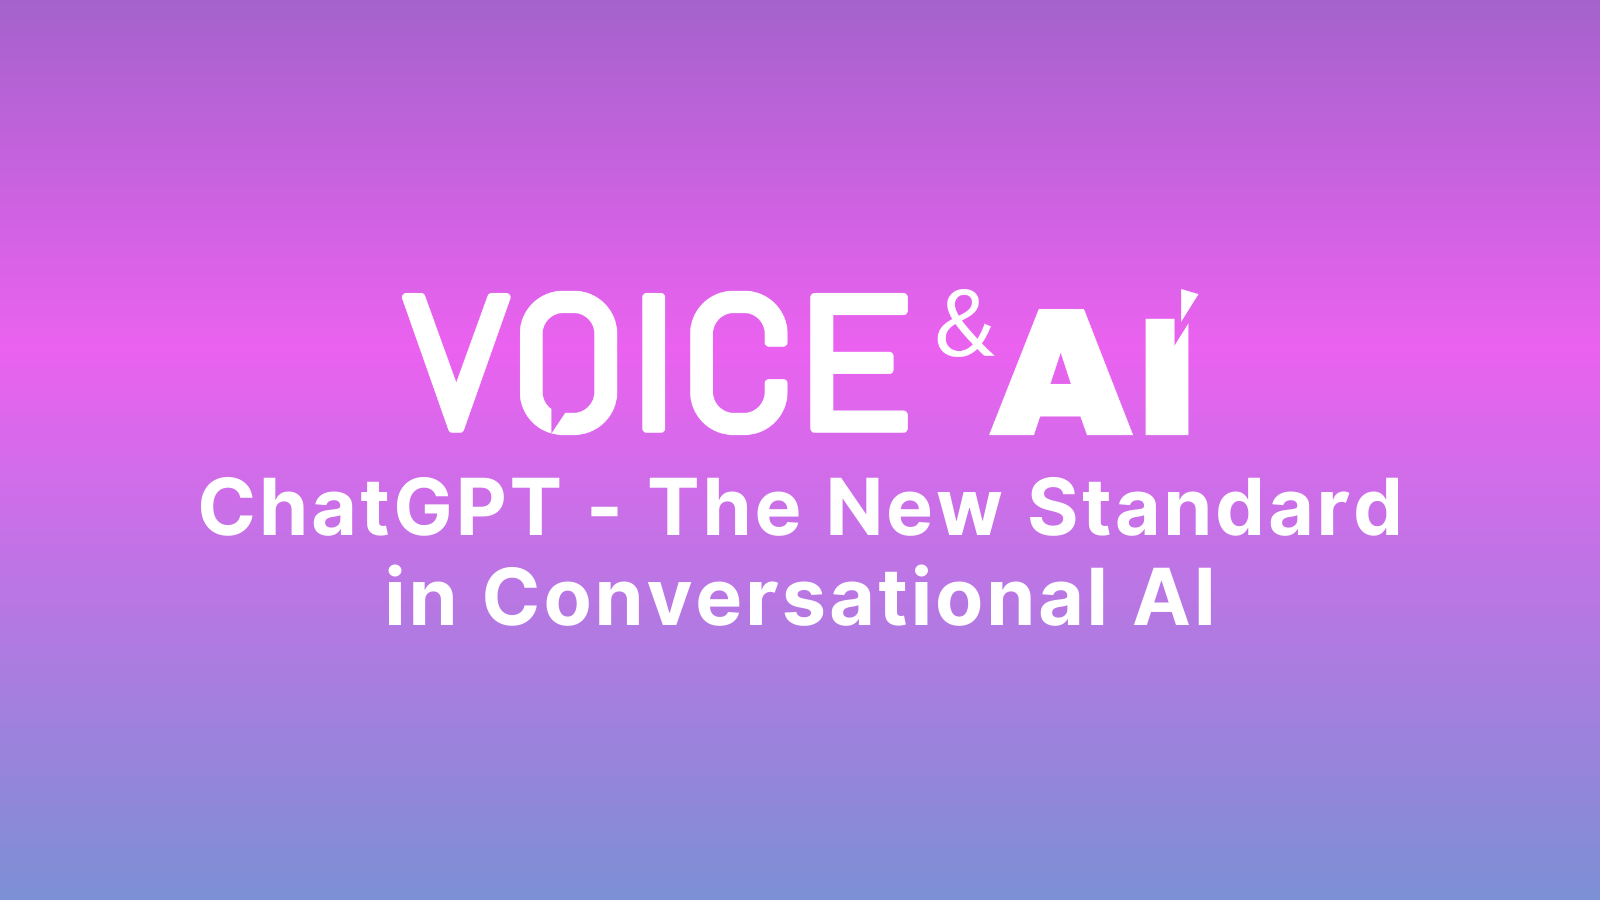 ChatGPT - The New Standard in Conversational AI